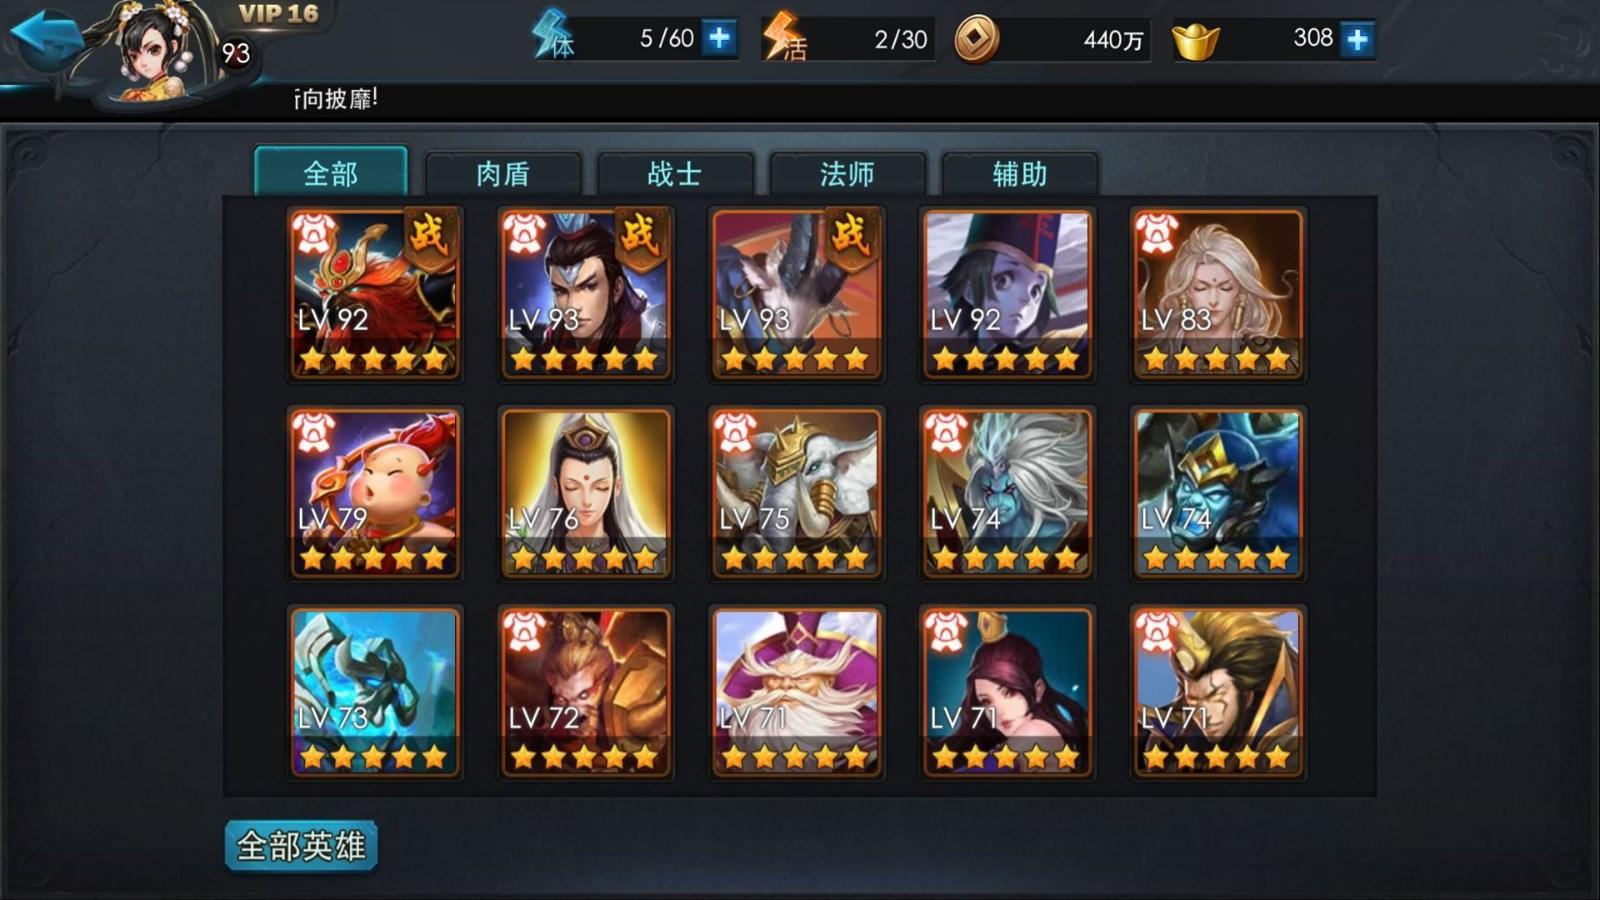  How to match the lineup of new players pushing pictures in the fight for the west